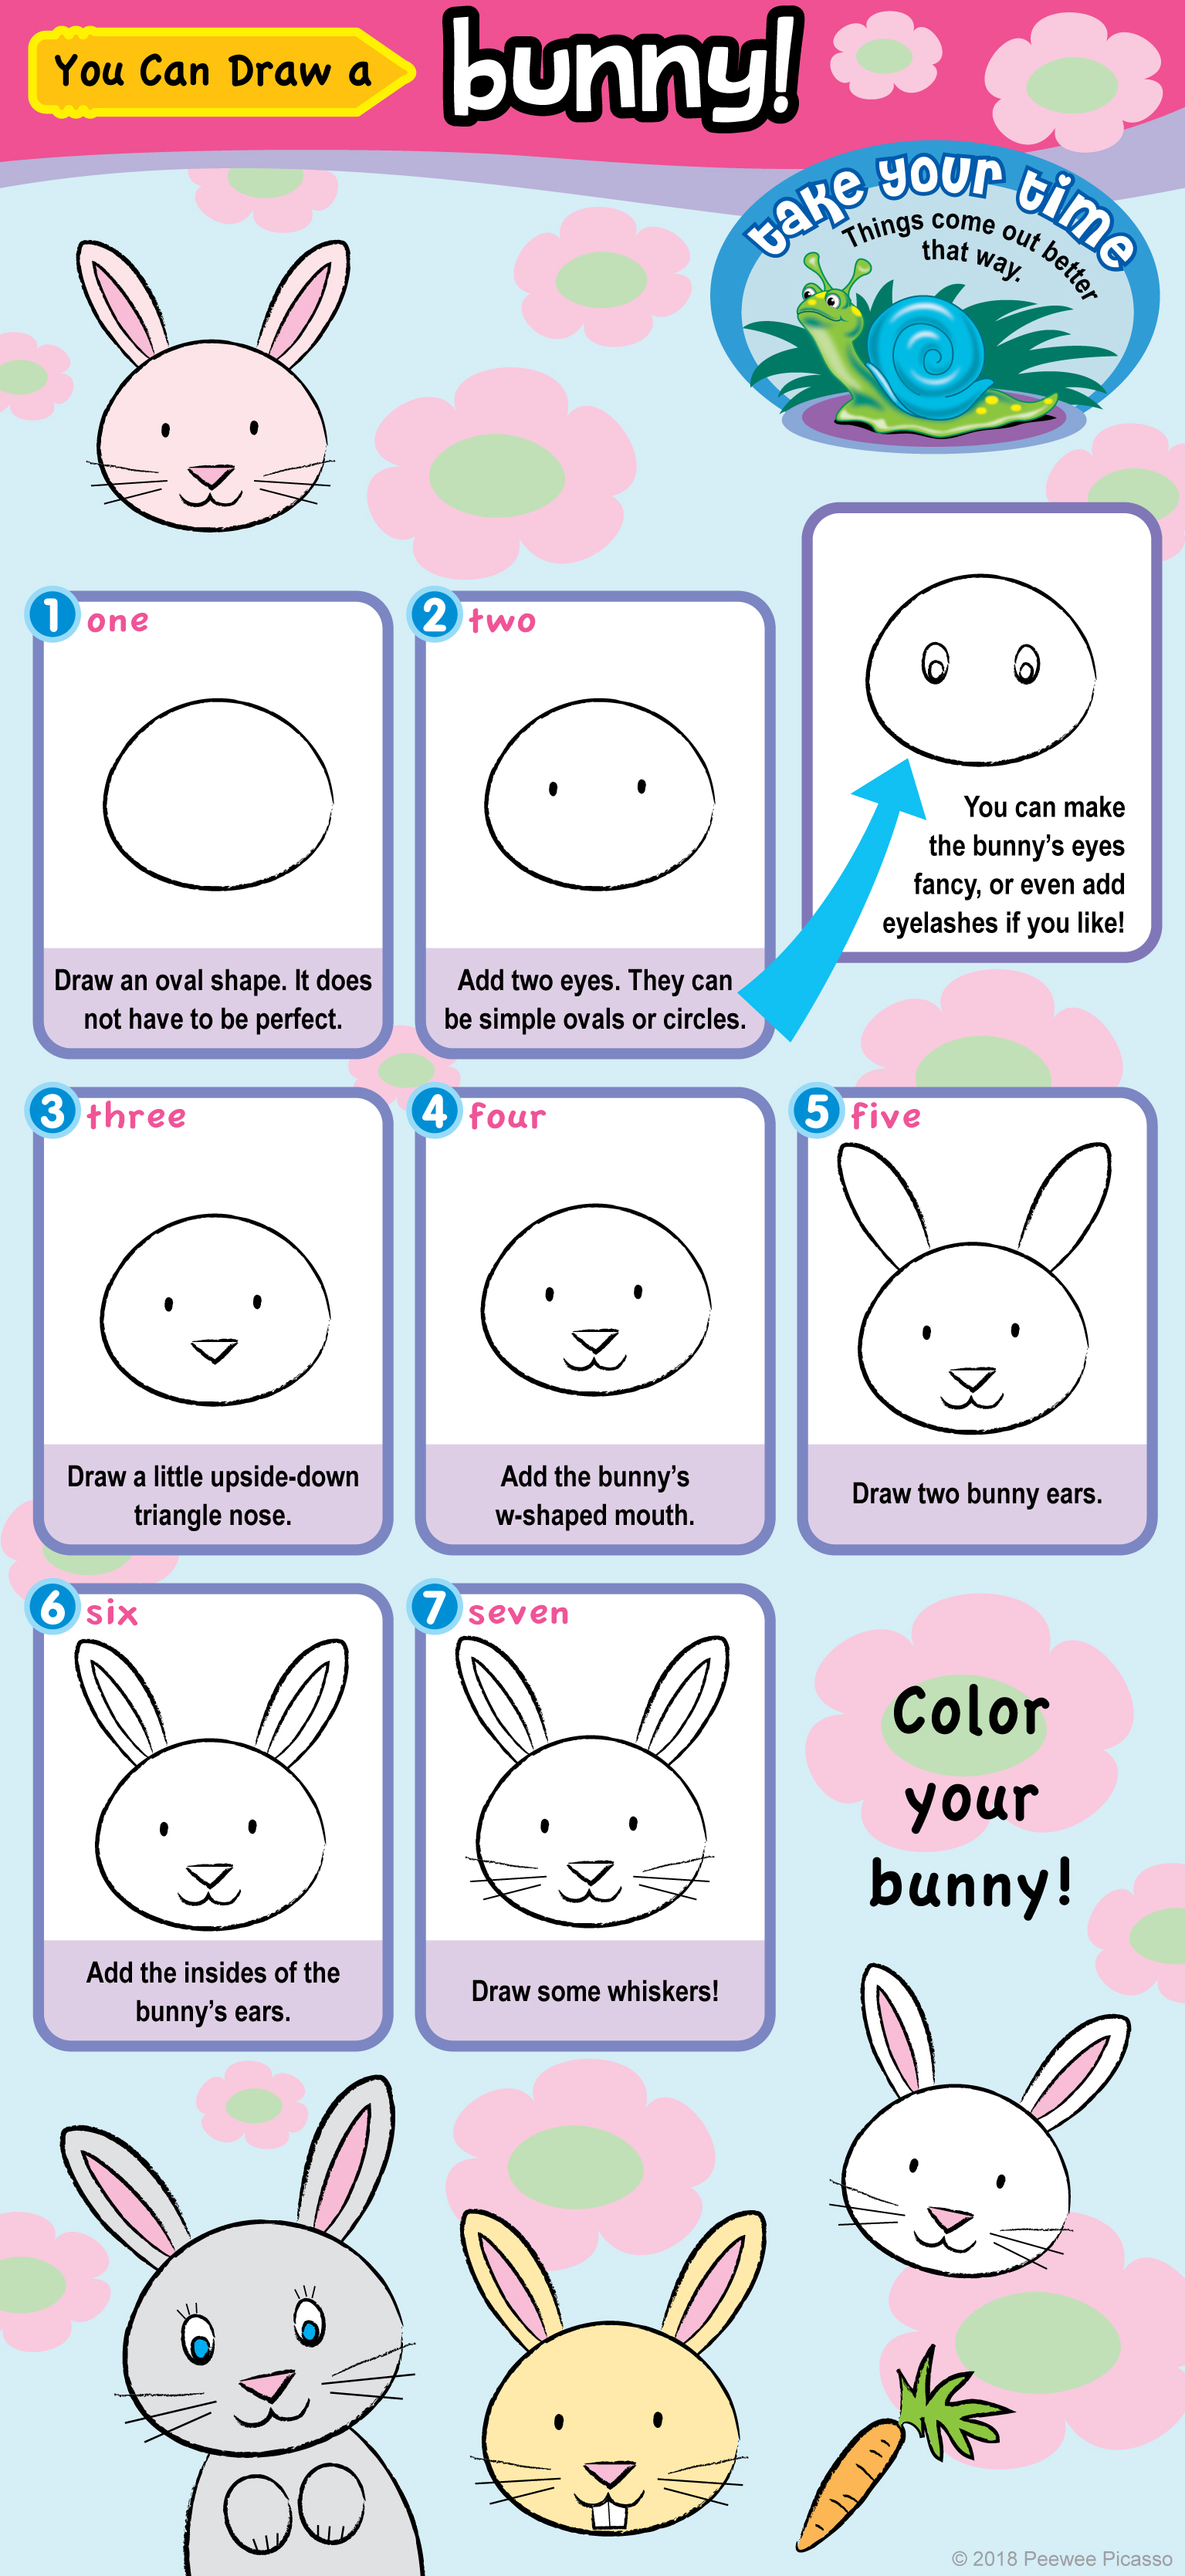 easy step by step drawing for children instructions for a bunny